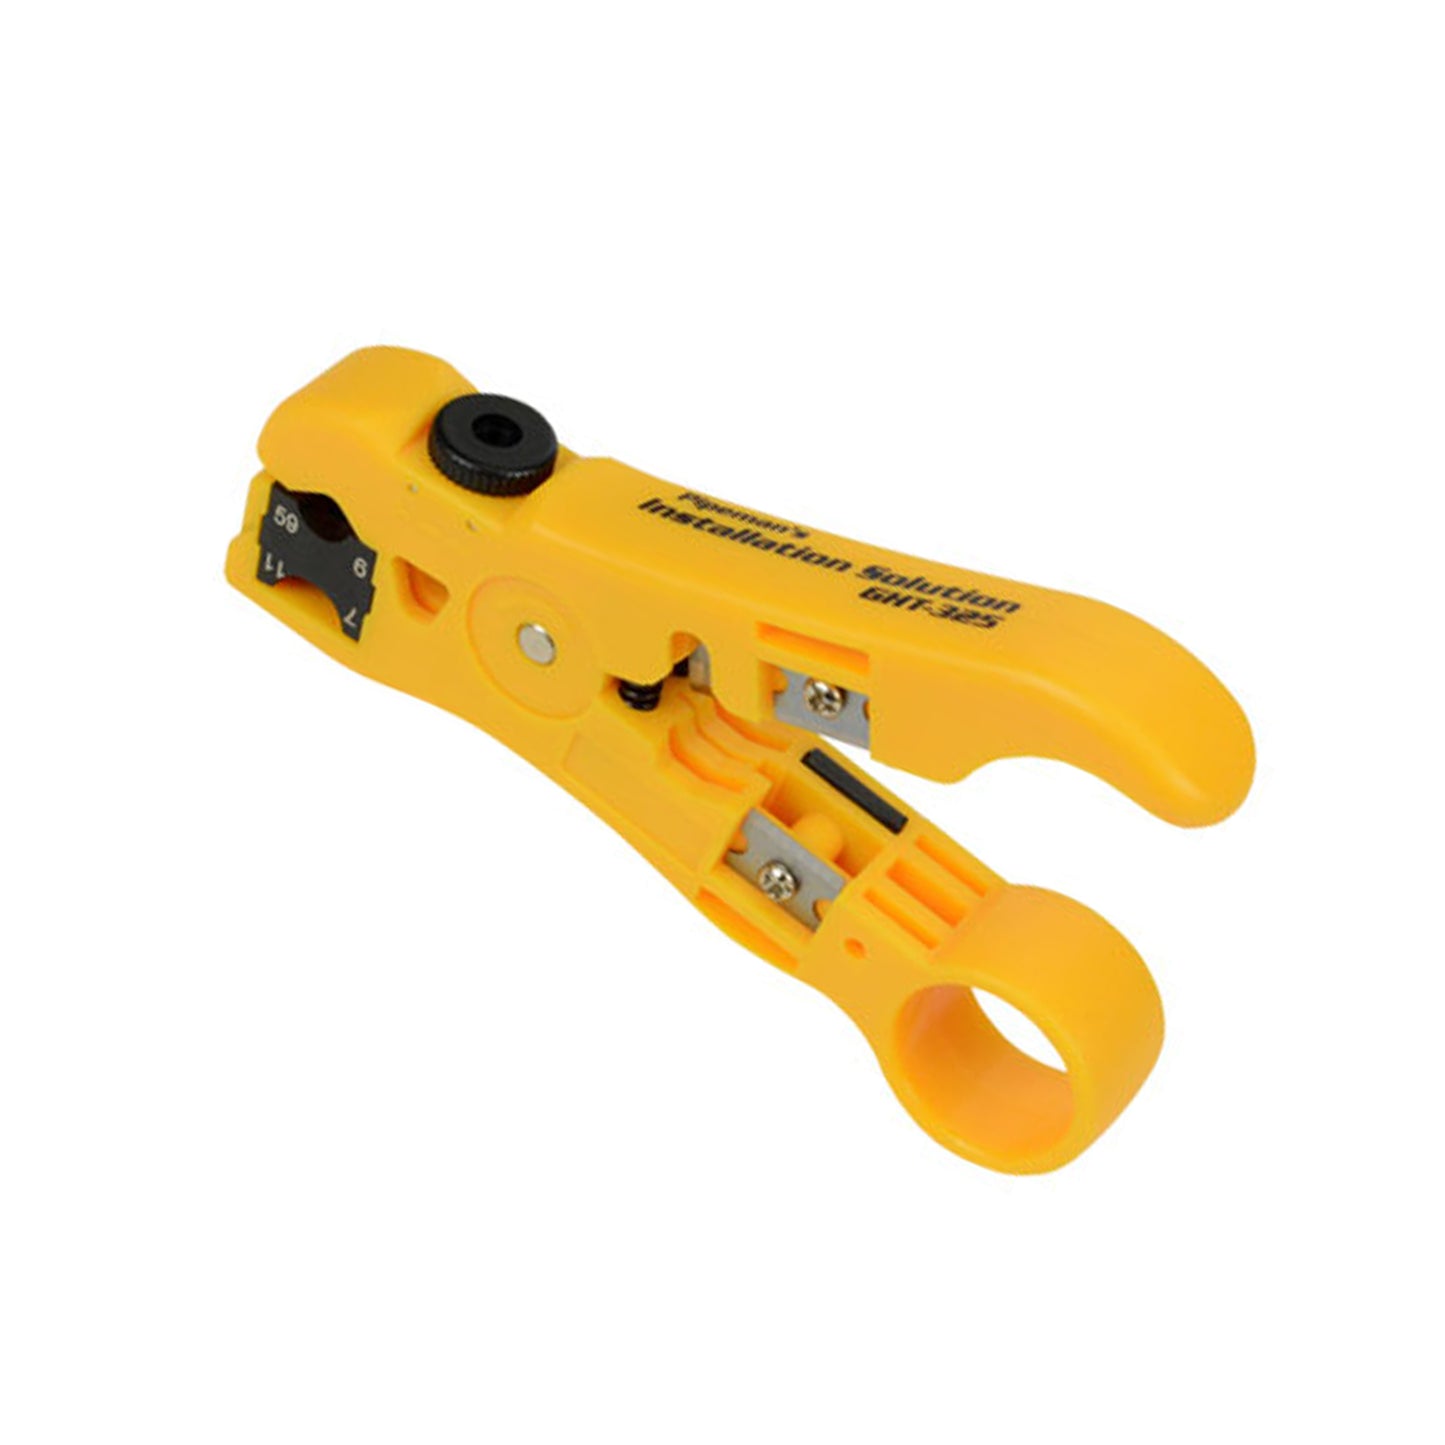 GHT-325 - Universal Coaxial Wire Stripping Tool